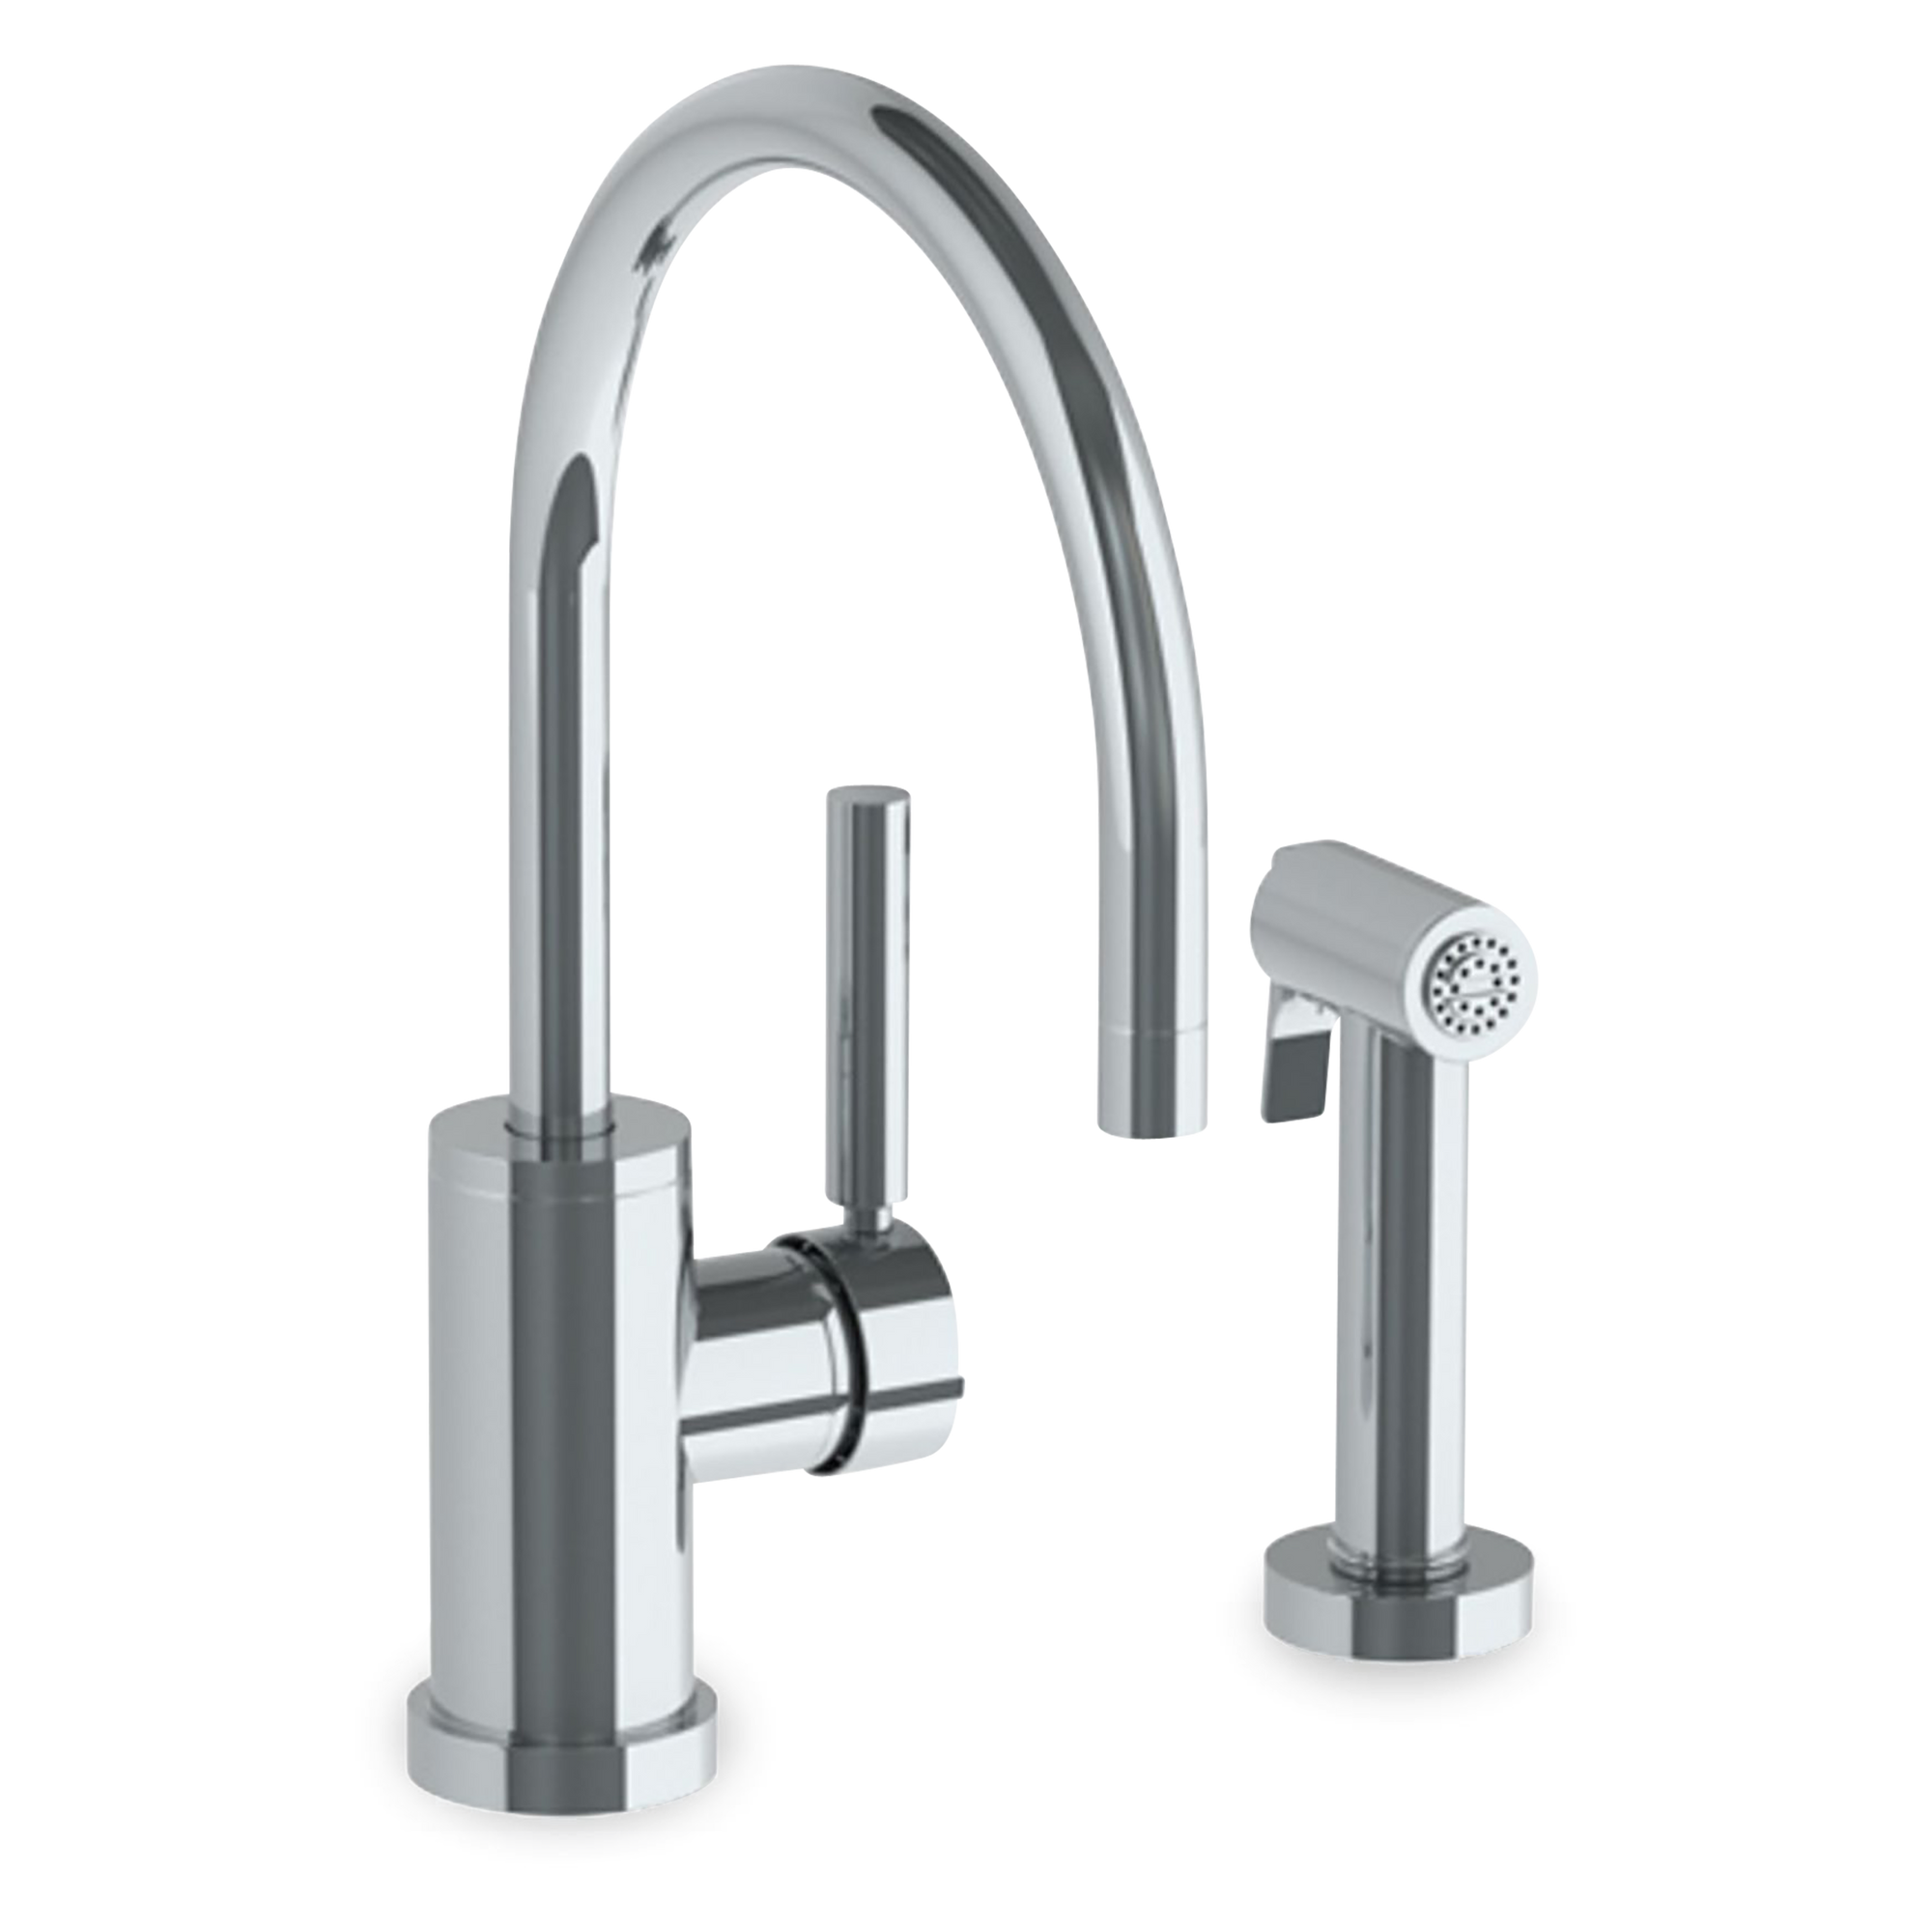 Single hole kitchen faucet with side spray.